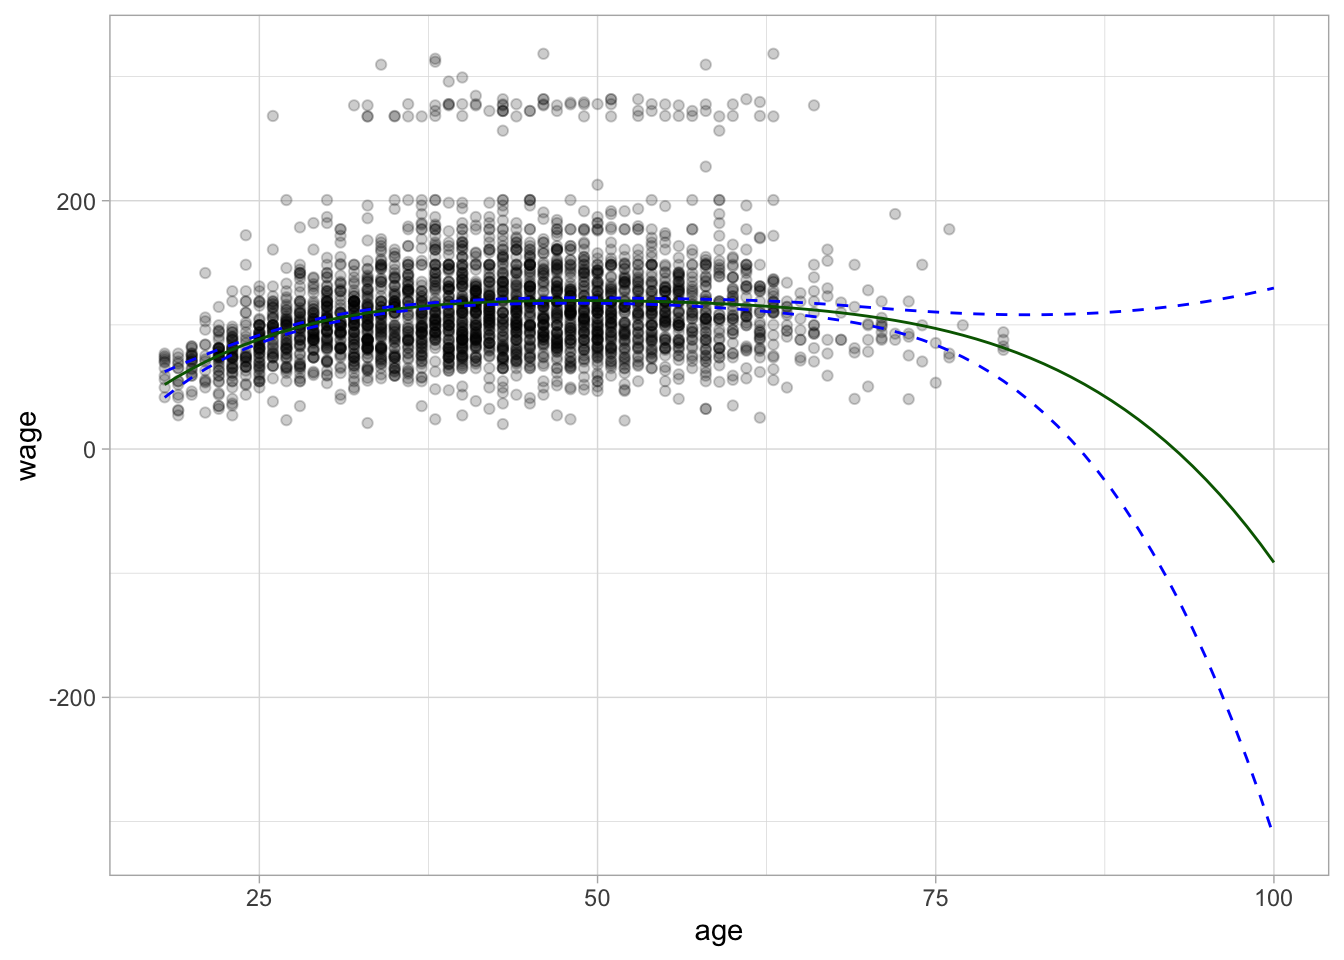 Scatter chart, age against the x-axis and wage against y-axis. Fairly normally distributed around wage == 100, with some another blob around wage == 275. A curve in dark green follows the middle of the data with two dottled curves follows closely around. The range for age has been increased beyond the data points and the green curve trails negative and the dotted lines quickly move away from the green curve.